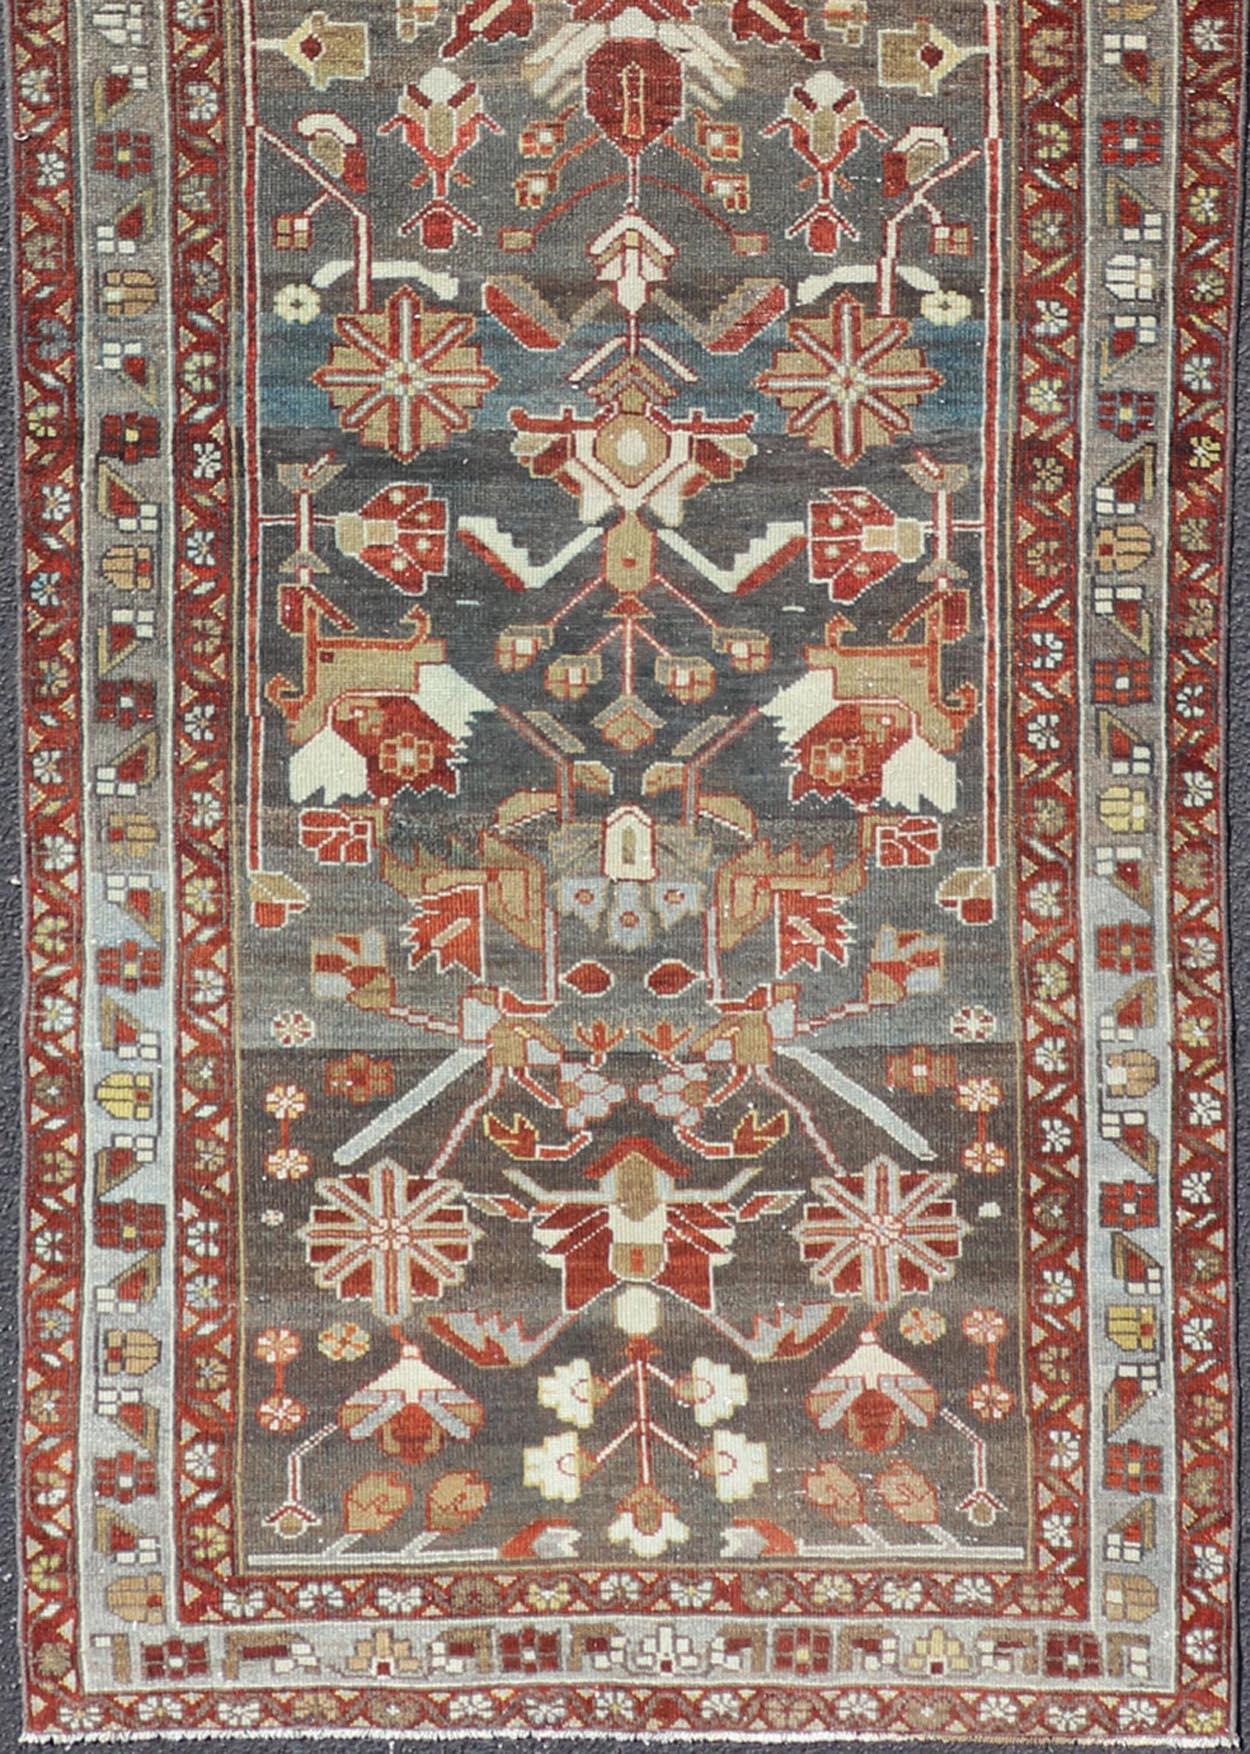 Geometric medallion design Persian Malayer runner with charcoal, gray, blue, red and tan colors, Keivan Woven Arts / rug EMB-9715-P13896, country of origin / type: Iran / Malayer, circa 1920

Measures: 3'6 x 11'10.